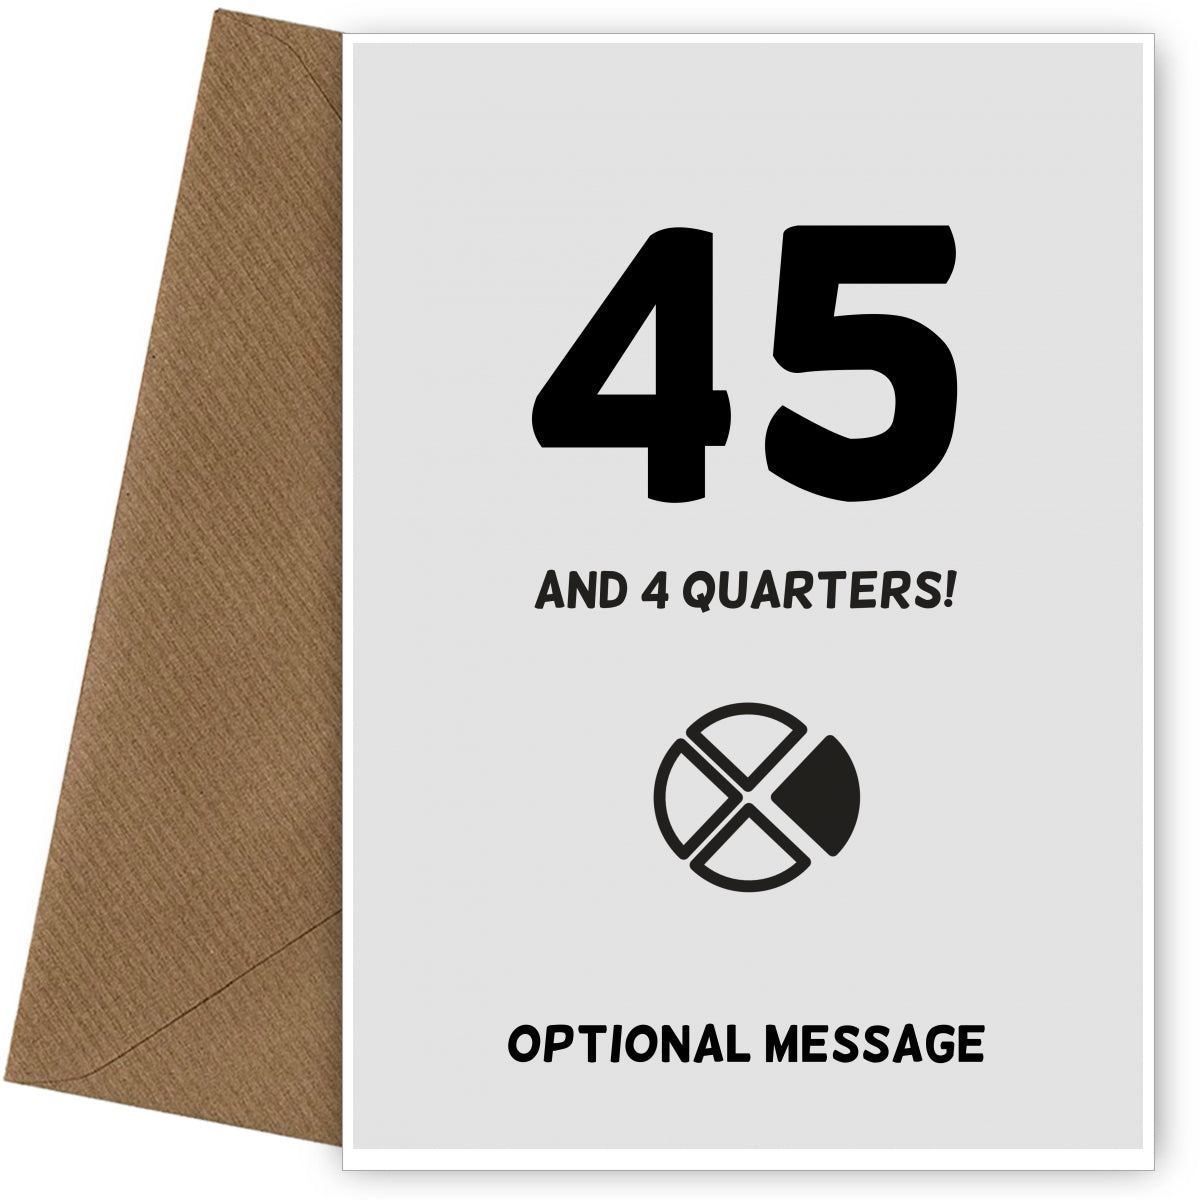 Happy 46th Birthday Card - 45 and 4 Quarters